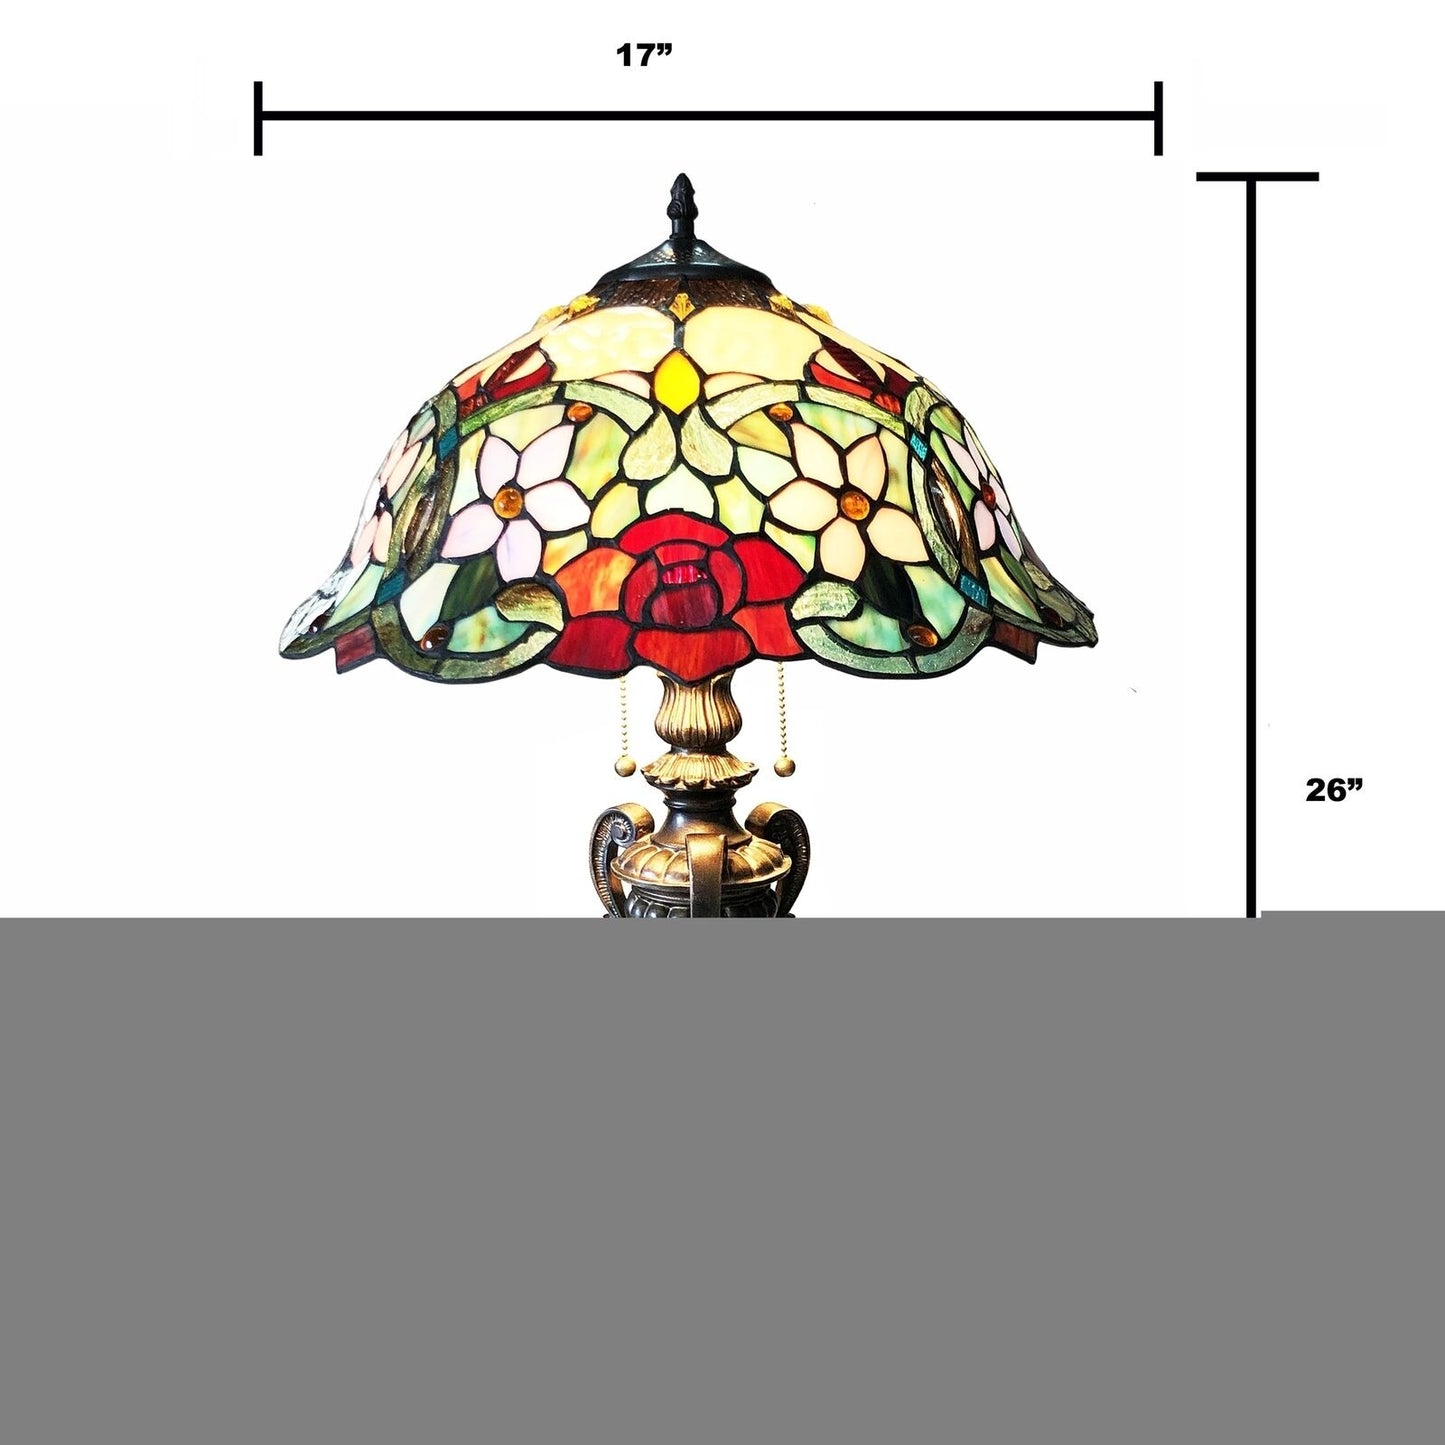 26in Chang Roses Tiffany Style Stained Glass Antique Bronze Finish Table Lamp